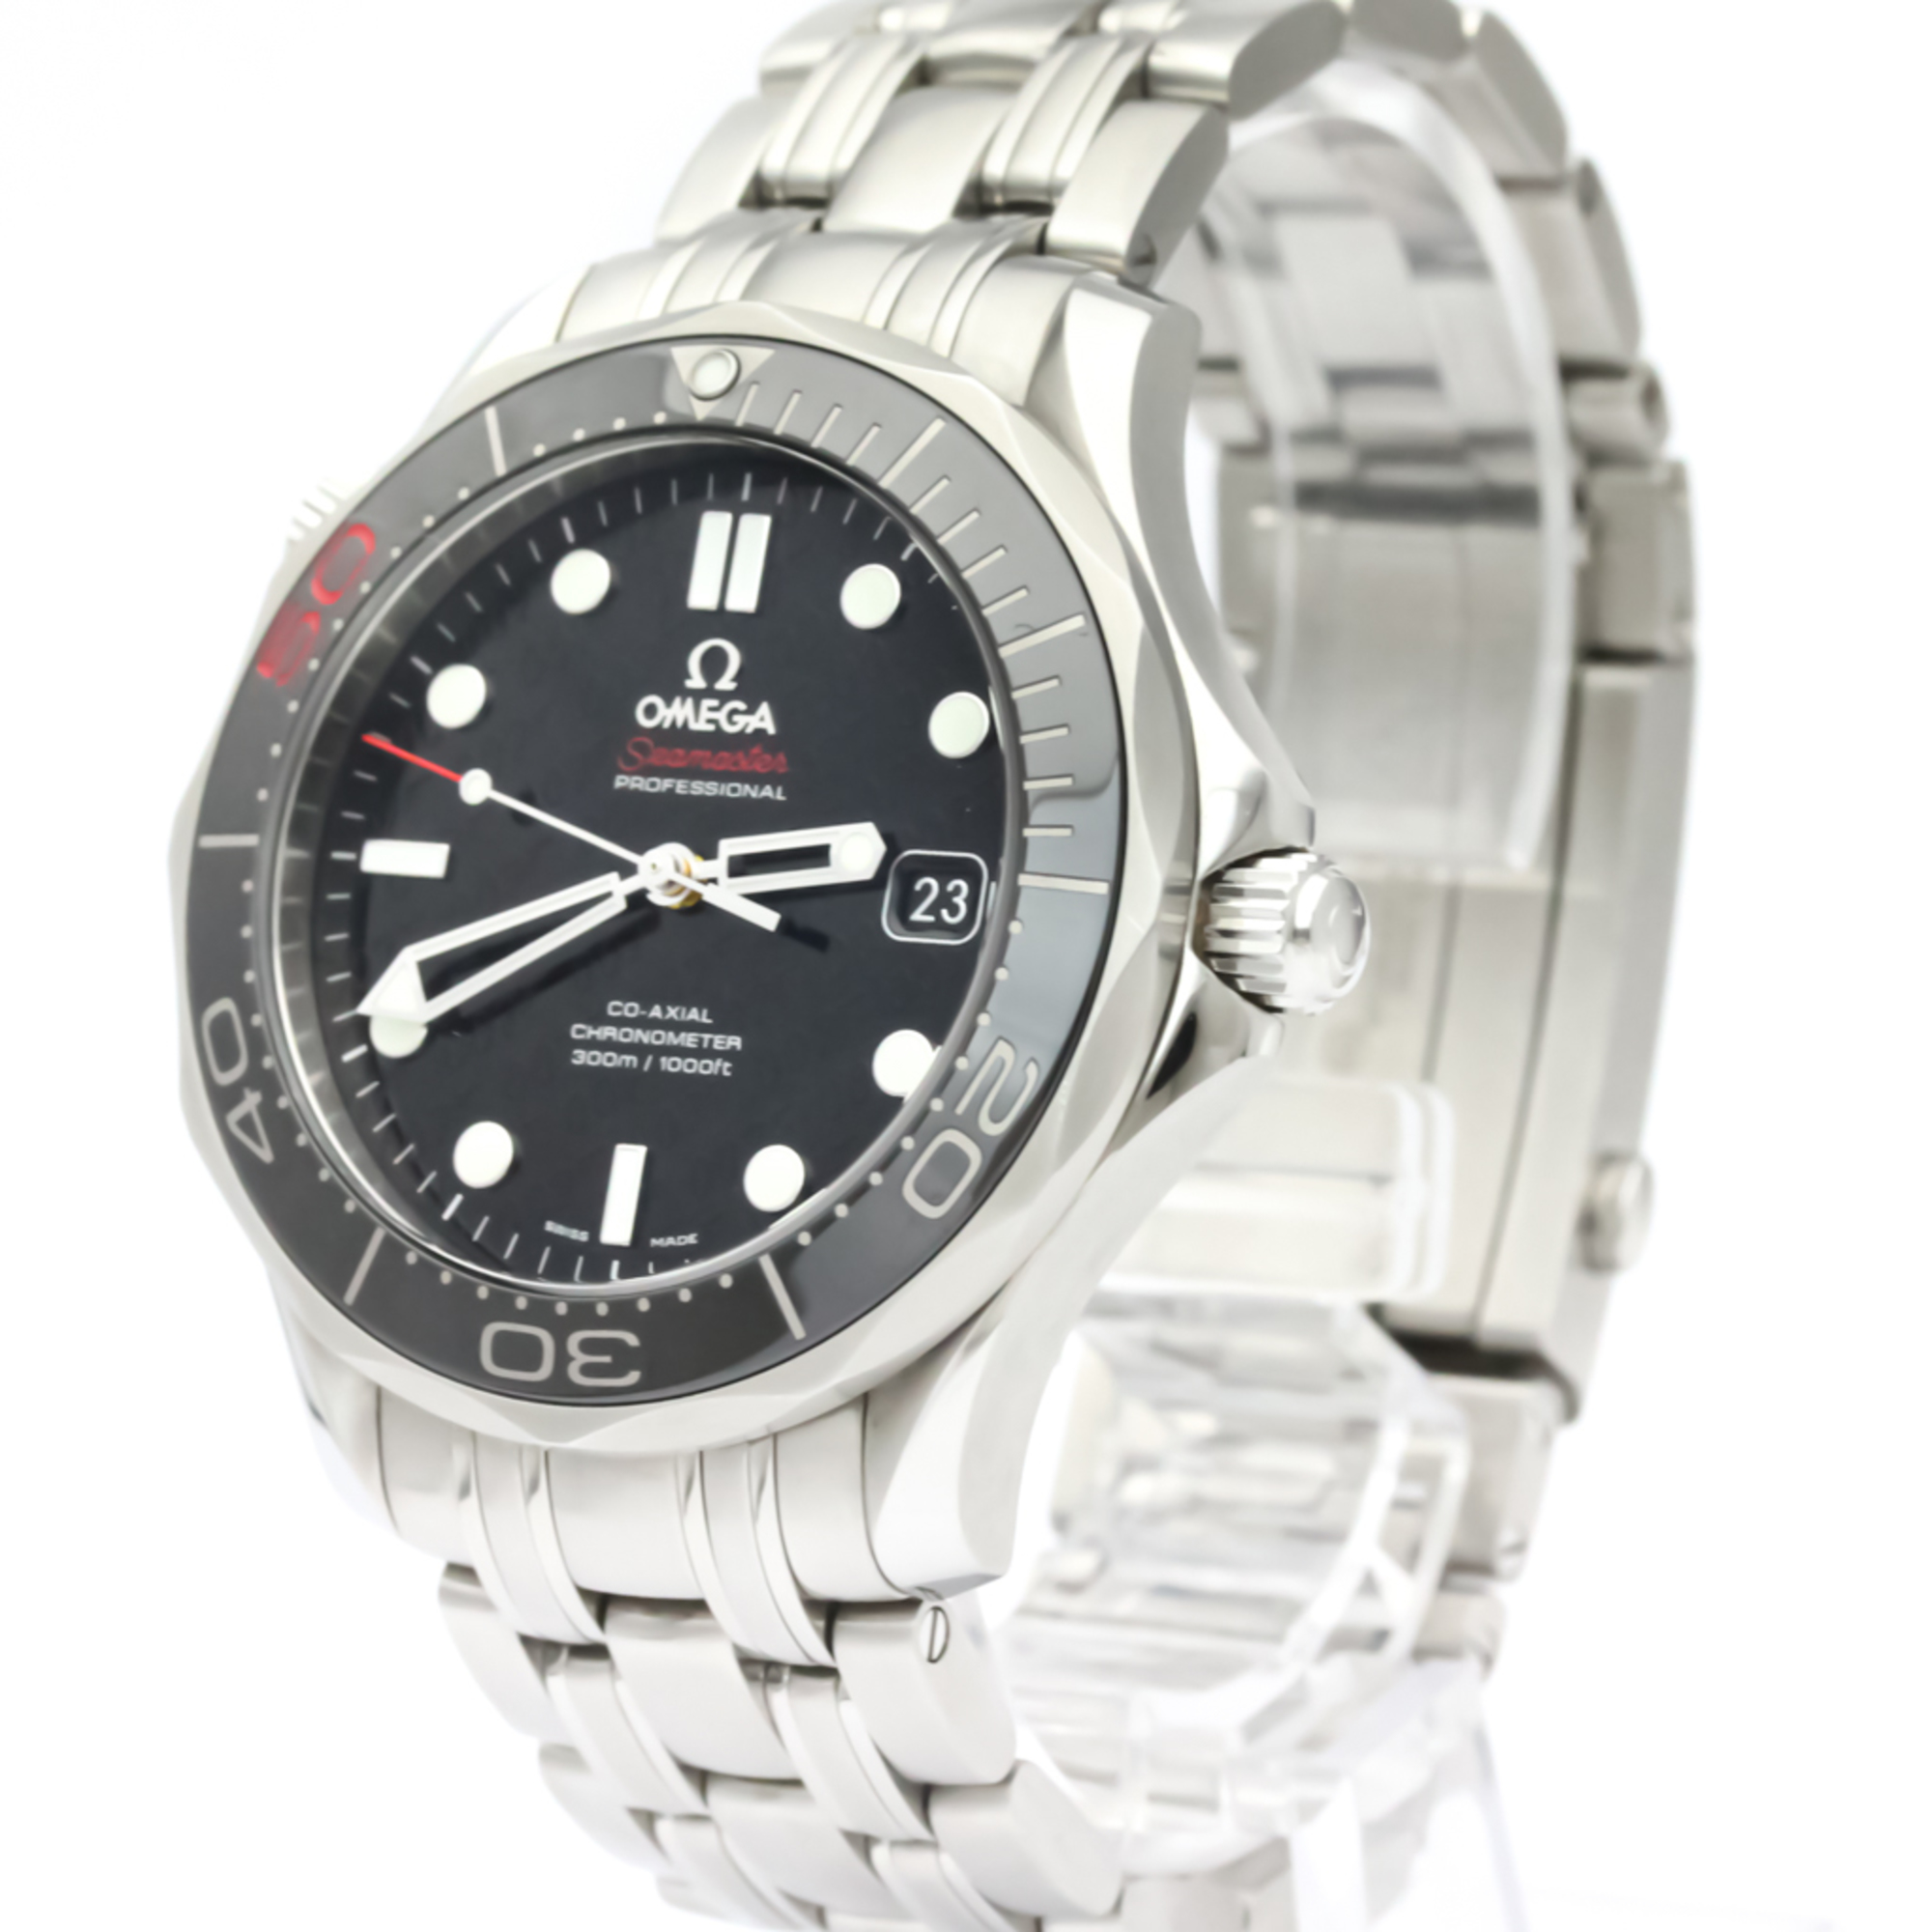 Omega Seamaster Automatic Stainless Steel Men's Sports Watch 212.30.41.20.01.005